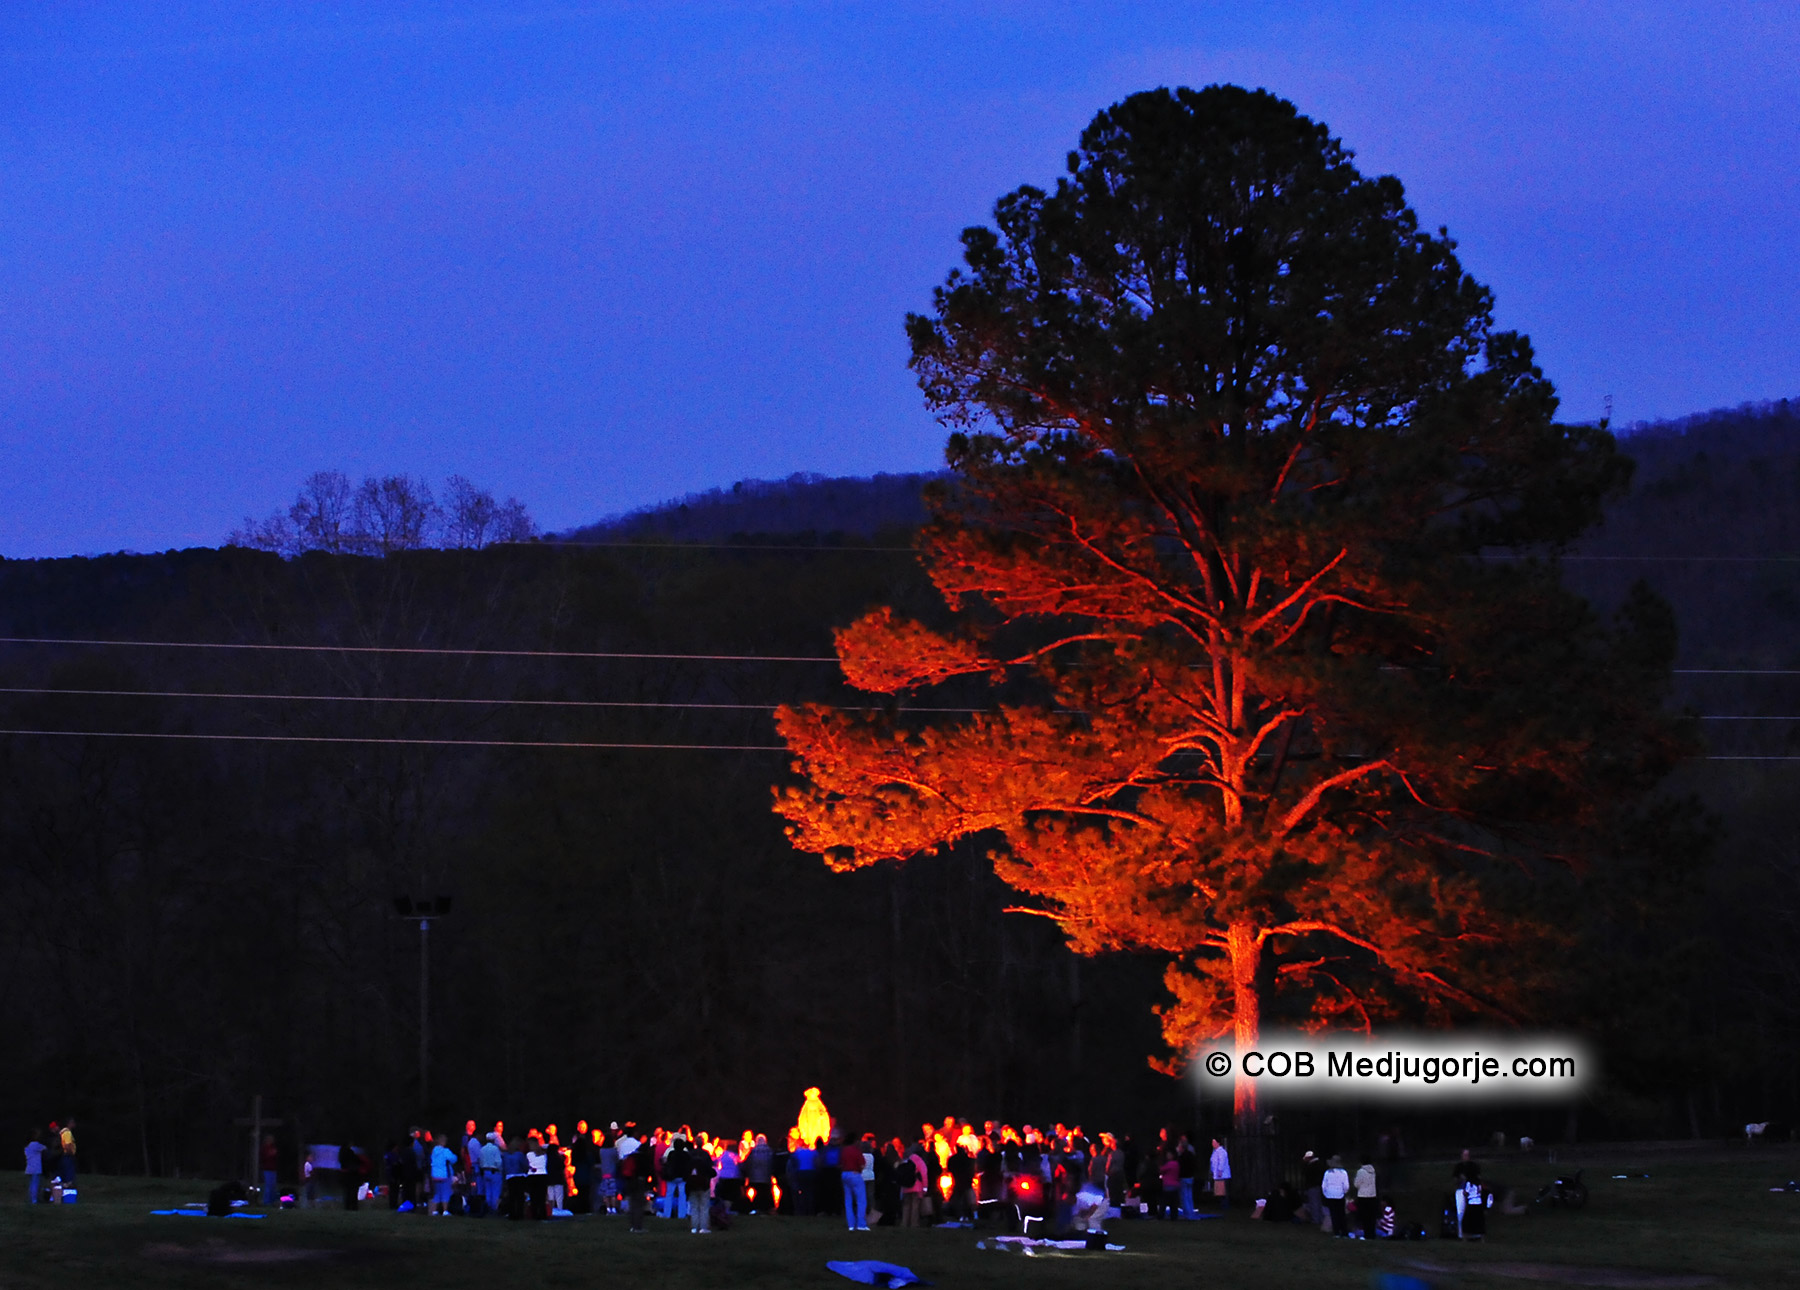 Pilgrims prepare for apparition in the field of apparitions march 22, 2011